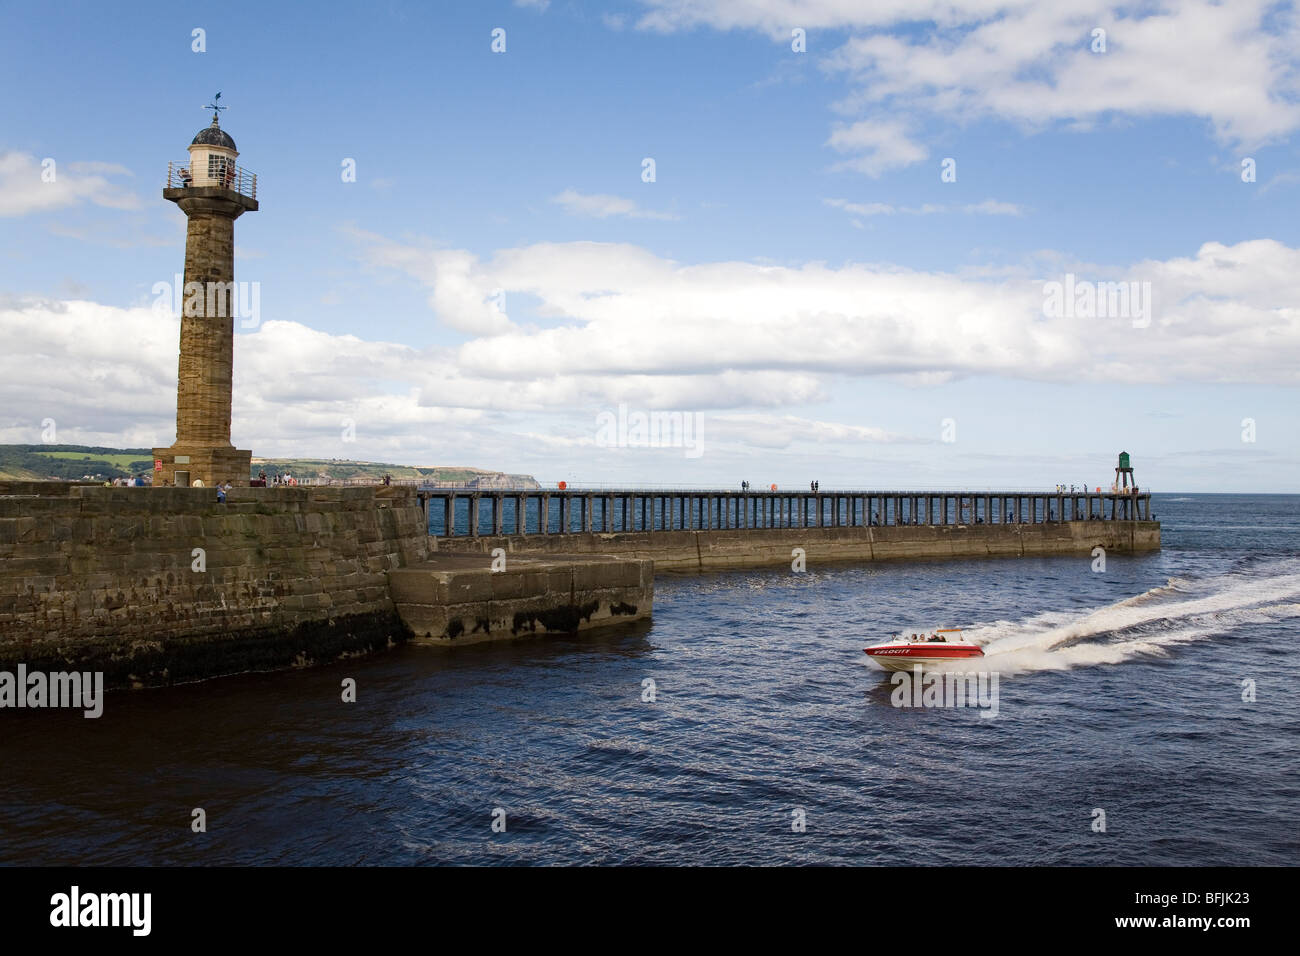 A motorboat navigates the old stone lighthouse on the West Pier of Whitby in North Yorkshire, England. Stock Photo